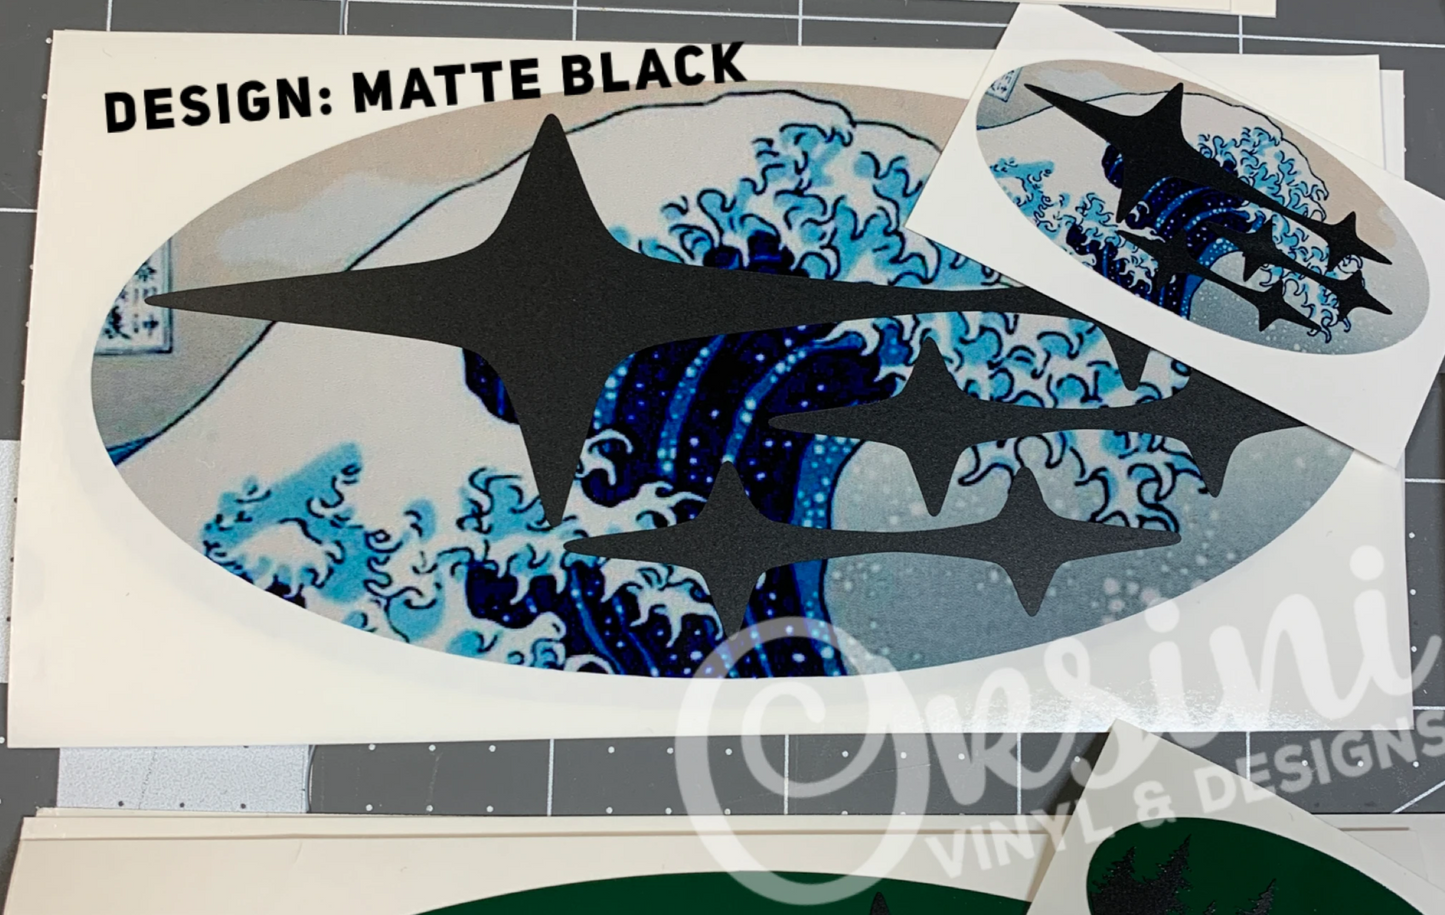 The Great Wave Emblem Overlay Decal Set